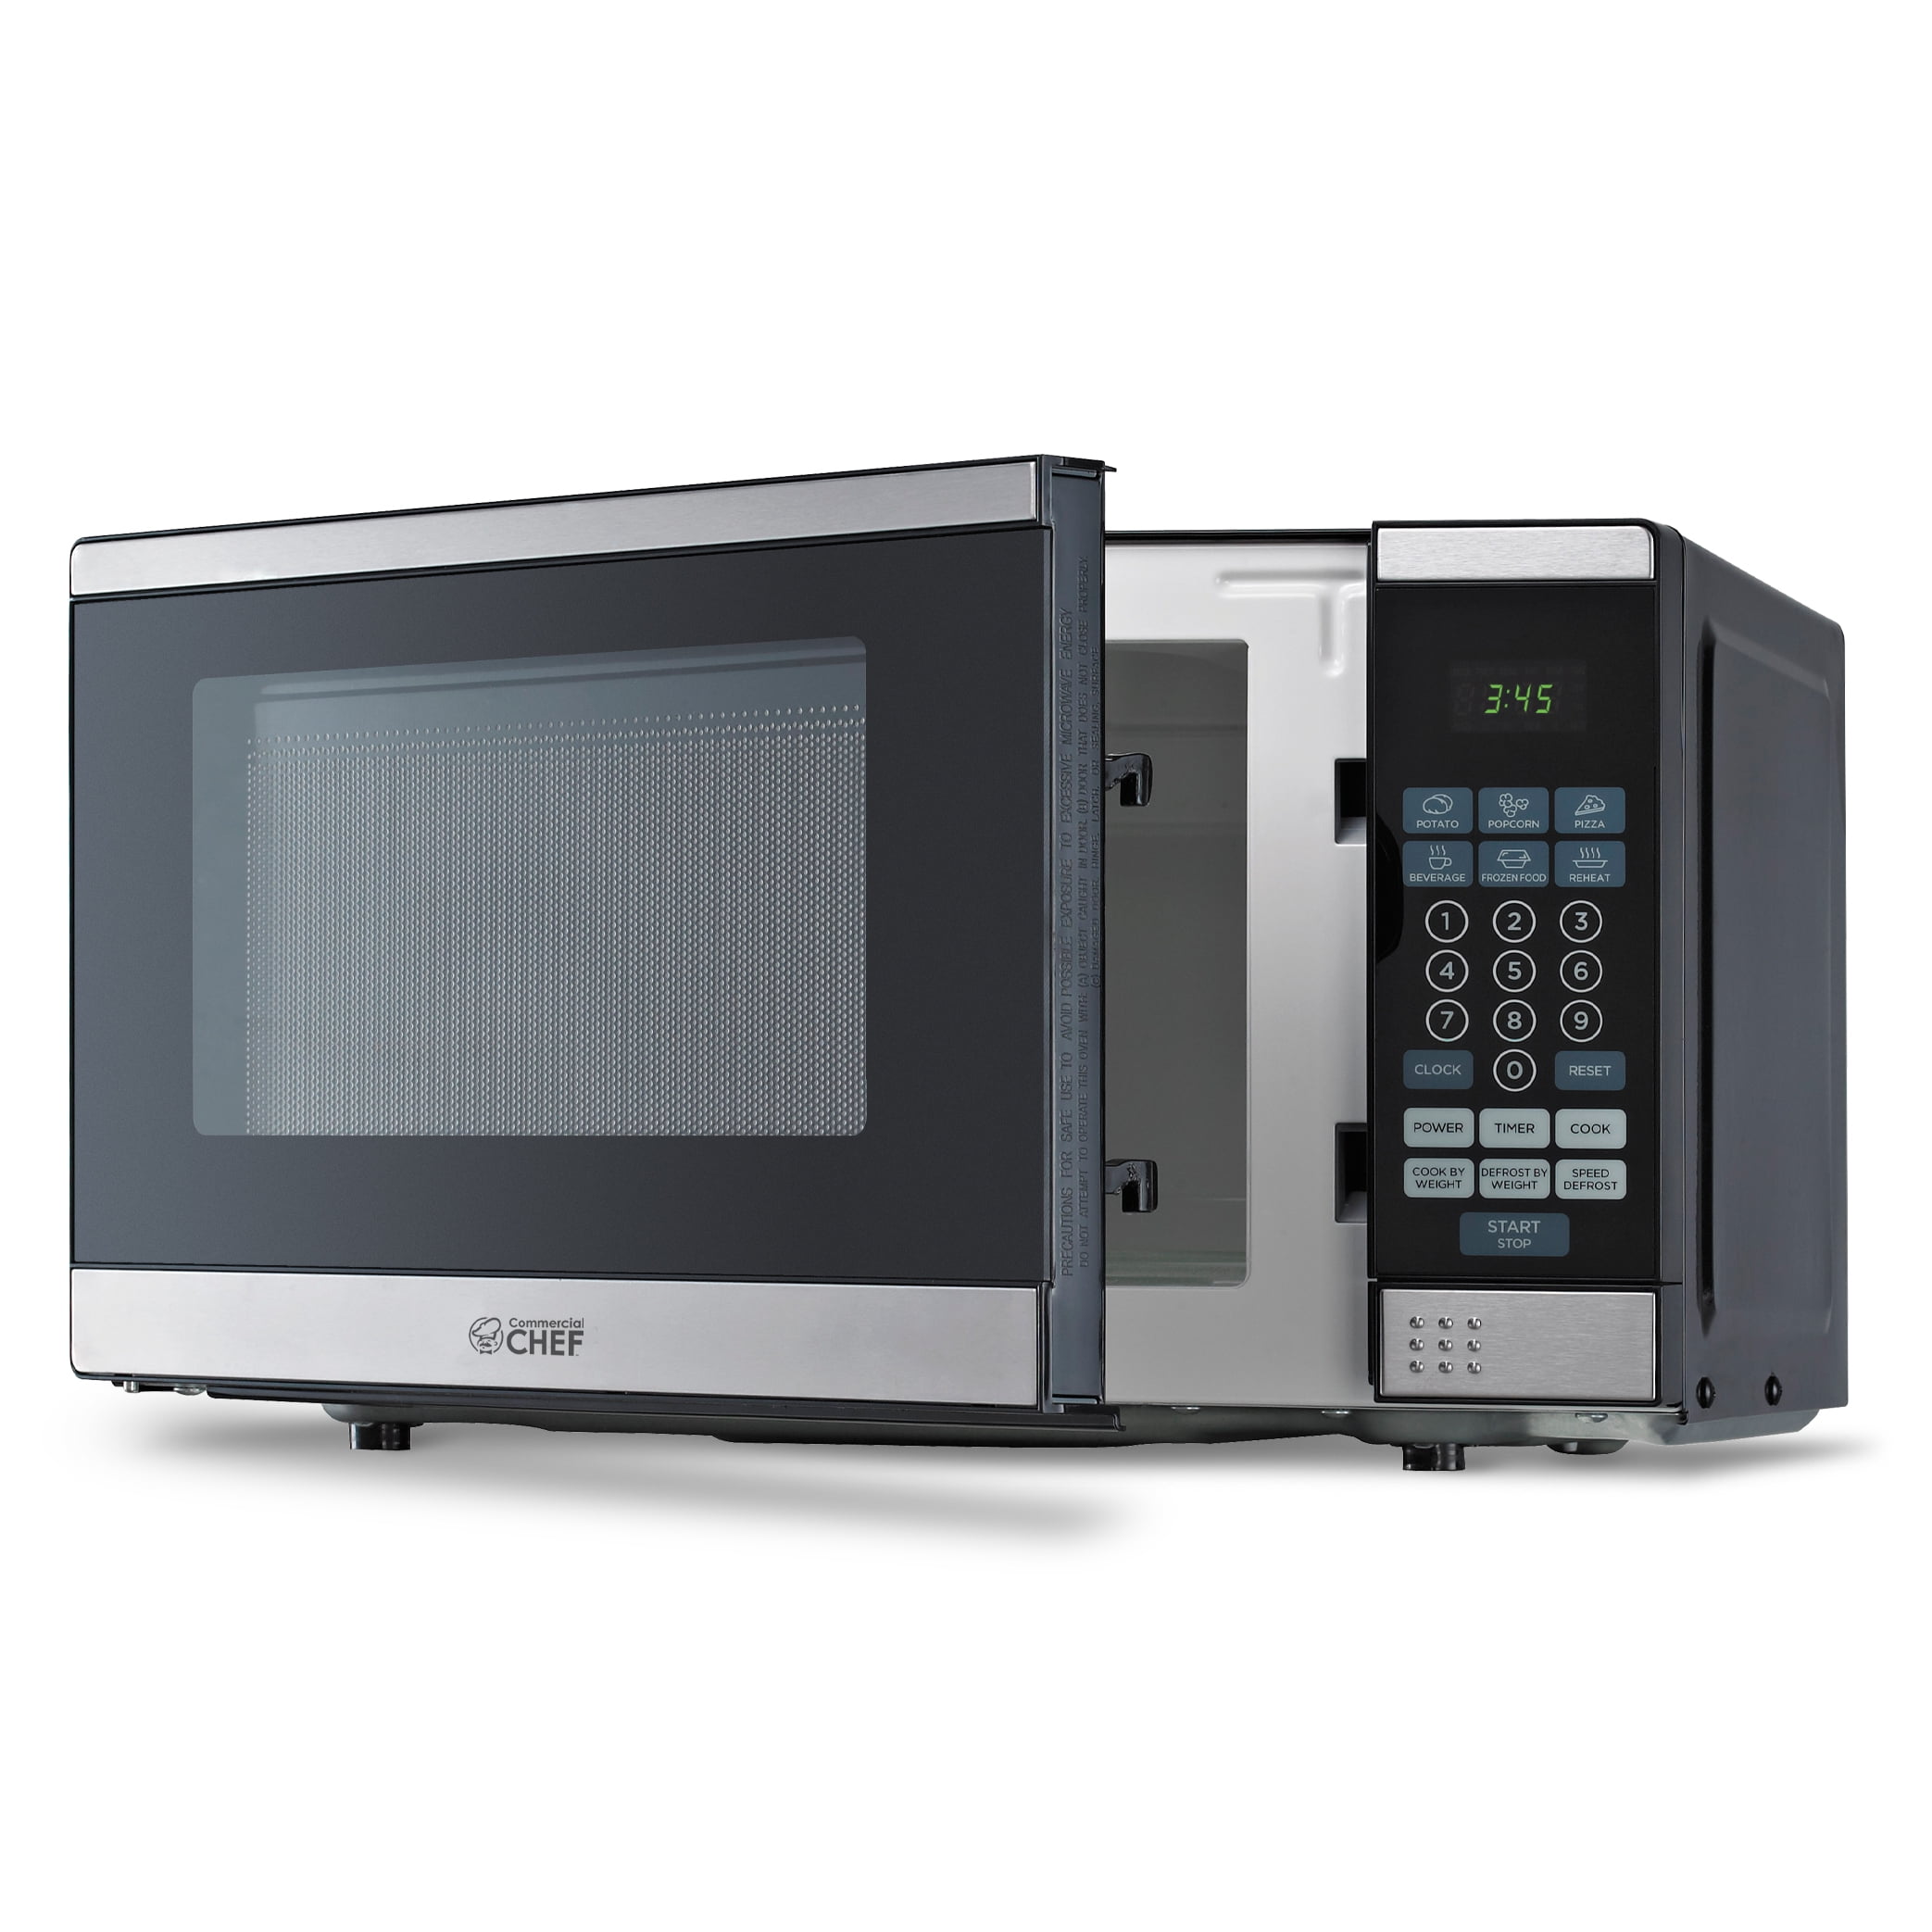 Microwave, .7 Cuft, Stainless Steel, 72-1440